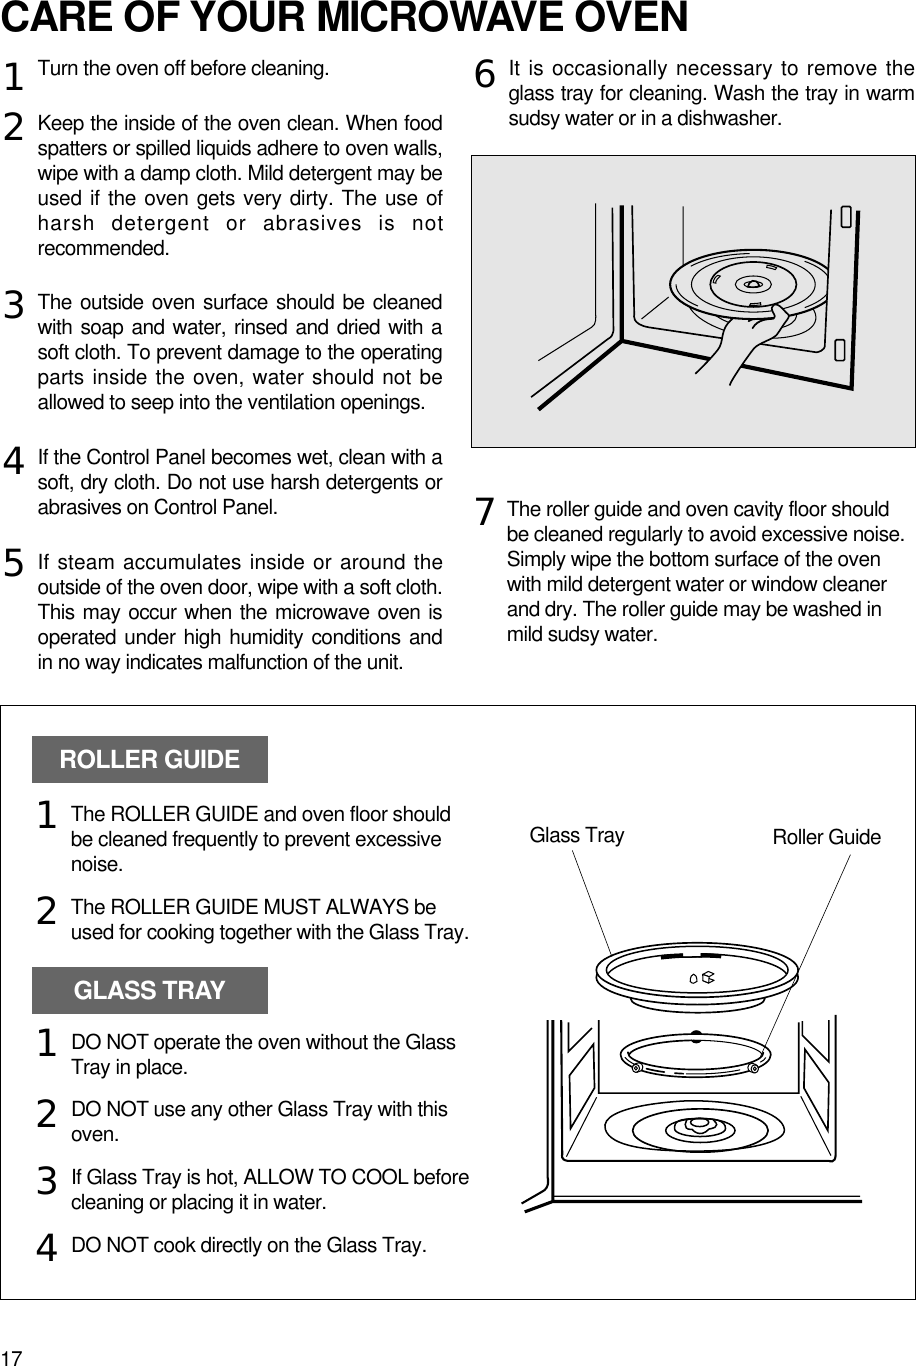 17CARE OF YOUR MICROWAVE OVENTurn the oven off before cleaning.Keep the inside of the oven clean. When foodspatters or spilled liquids adhere to oven walls,wipe with a damp cloth. Mild detergent may beused if the oven gets very dirty. The use ofharsh detergent or abrasives is notrecommended.The outside oven surface should be cleanedwith soap and water, rinsed and dried with asoft cloth. To prevent damage to the operatingparts inside the oven, water should not beallowed to seep into the ventilation openings.If the Control Panel becomes wet, clean with asoft, dry cloth. Do not use harsh detergents orabrasives on Control Panel.If steam accumulates inside or around theoutside of the oven door, wipe with a soft cloth.This may occur when the microwave oven isoperated under high humidity conditions andin no way indicates malfunction of the unit.It is occasionally necessary to remove theglass tray for cleaning. Wash the tray in warmsudsy water or in a dishwasher.1234567The roller guide and oven cavity floor shouldbe cleaned regularly to avoid excessive noise. Simply wipe the bottom surface of the ovenwith mild detergent water or window cleanerand dry. The roller guide may be washed inmild sudsy water.ROLLER GUIDEGLASS TRAYGlass Tray Roller GuideThe ROLLER GUIDE and oven floor shouldbe cleaned frequently to prevent excessivenoise.The ROLLER GUIDE MUST ALWAYS beused for cooking together with the Glass Tray.DO NOT operate the oven without the GlassTray in place.DO NOT use any other Glass Tray with thisoven.If Glass Tray is hot, ALLOW TO COOL beforecleaning or placing it in water.DO NOT cook directly on the Glass Tray.121234